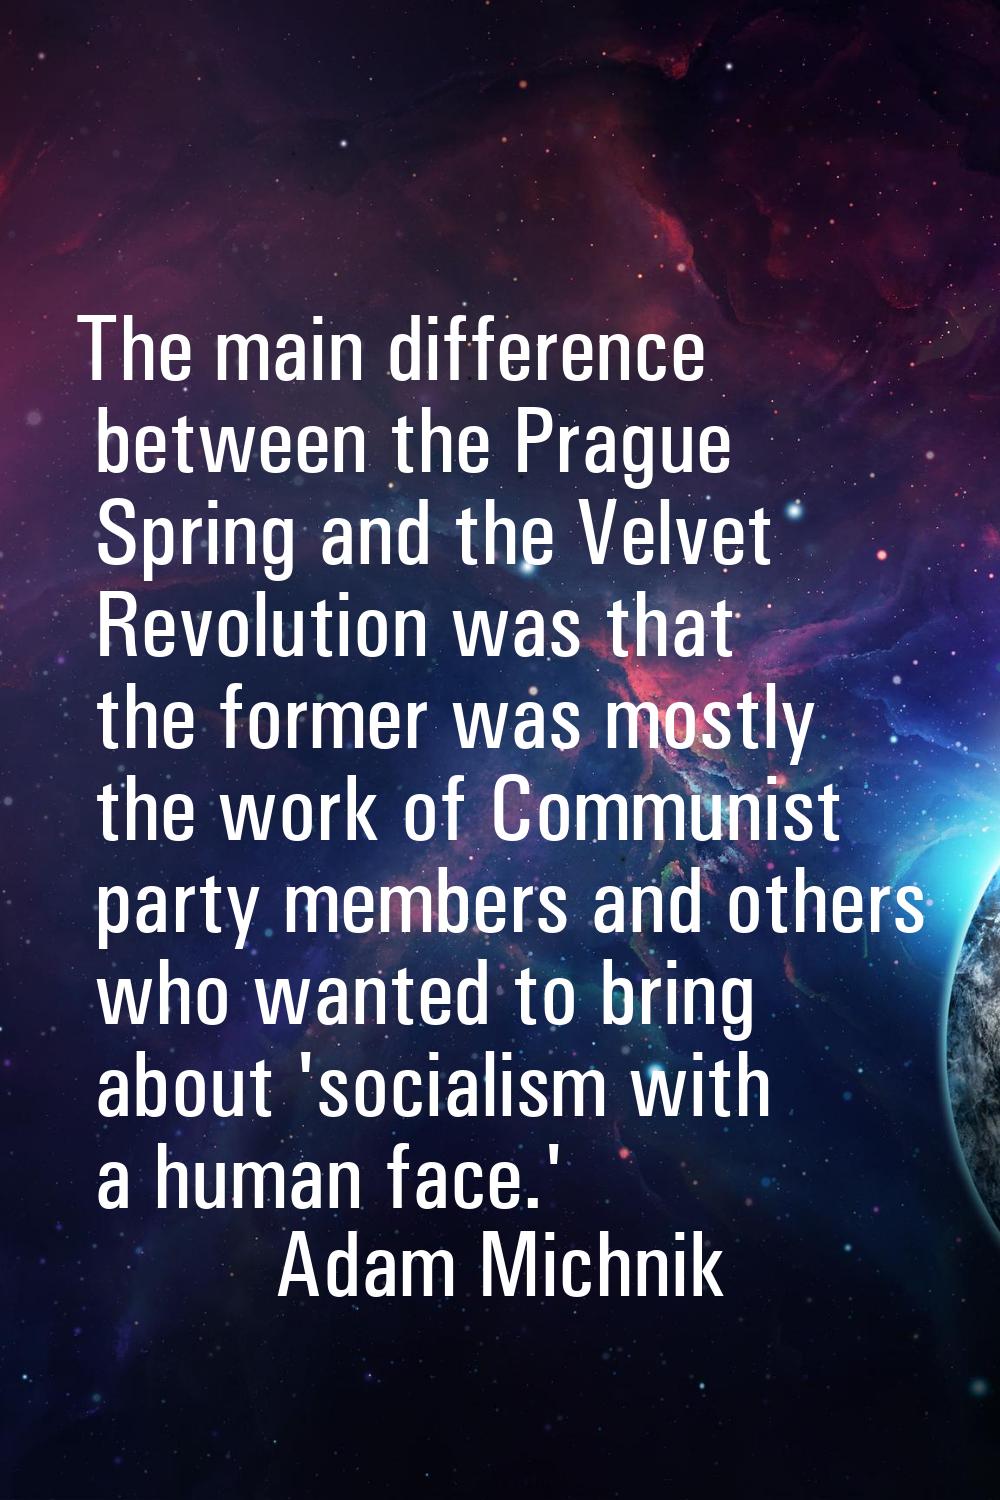 The main difference between the Prague Spring and the Velvet Revolution was that the former was mos